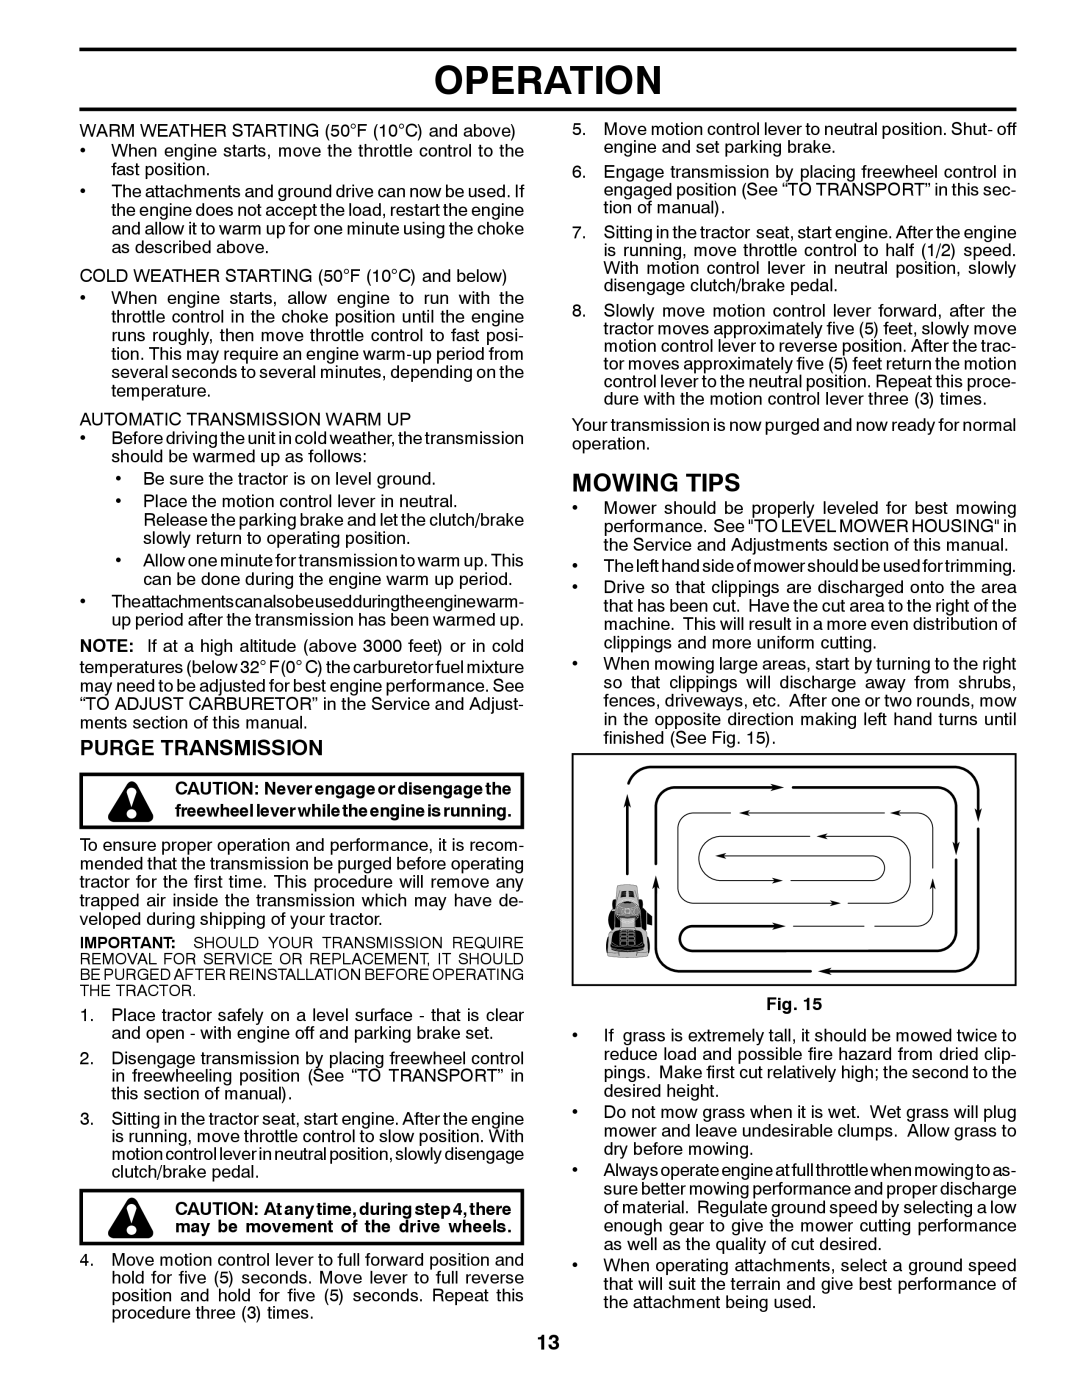 McCulloch 96041018000 manual Mowing Tips, Operation, Purge Transmission 